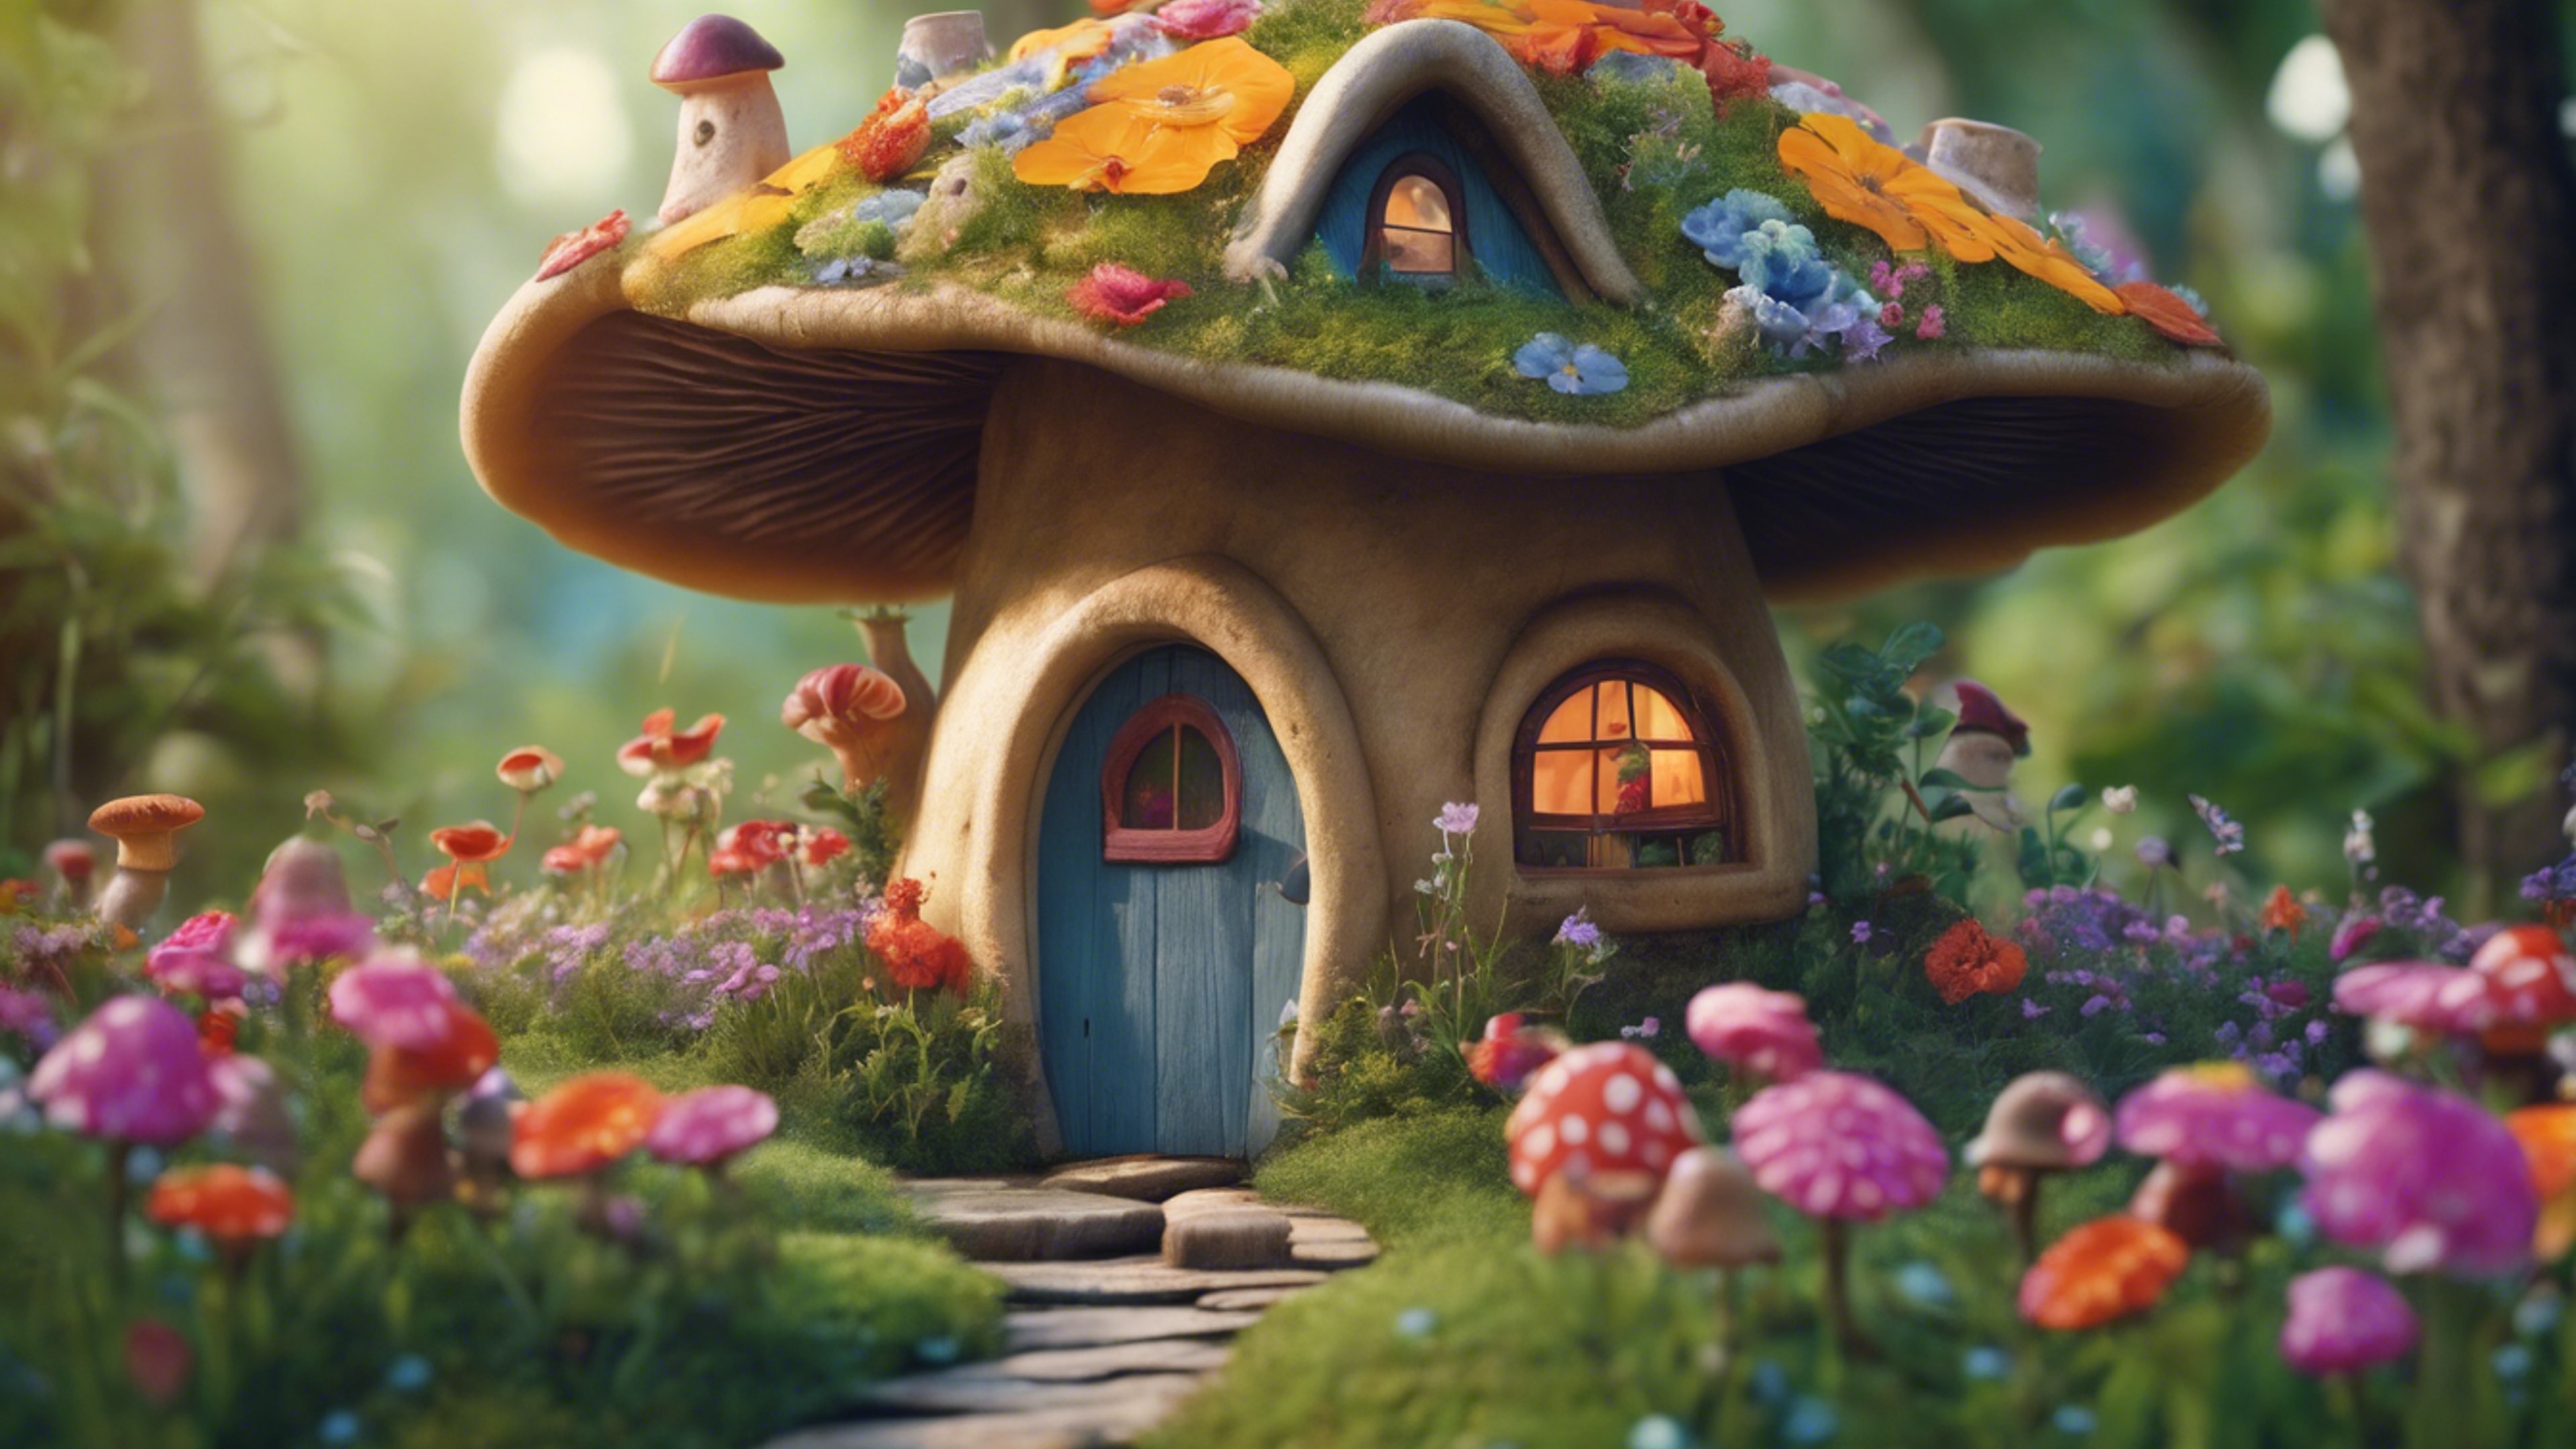 An old-fashioned, whimsical mushroom house, straight out of a children's storybook, nestled amid colorful flowers at the end of a winding path. Tapet[bbbff29f860842789321]